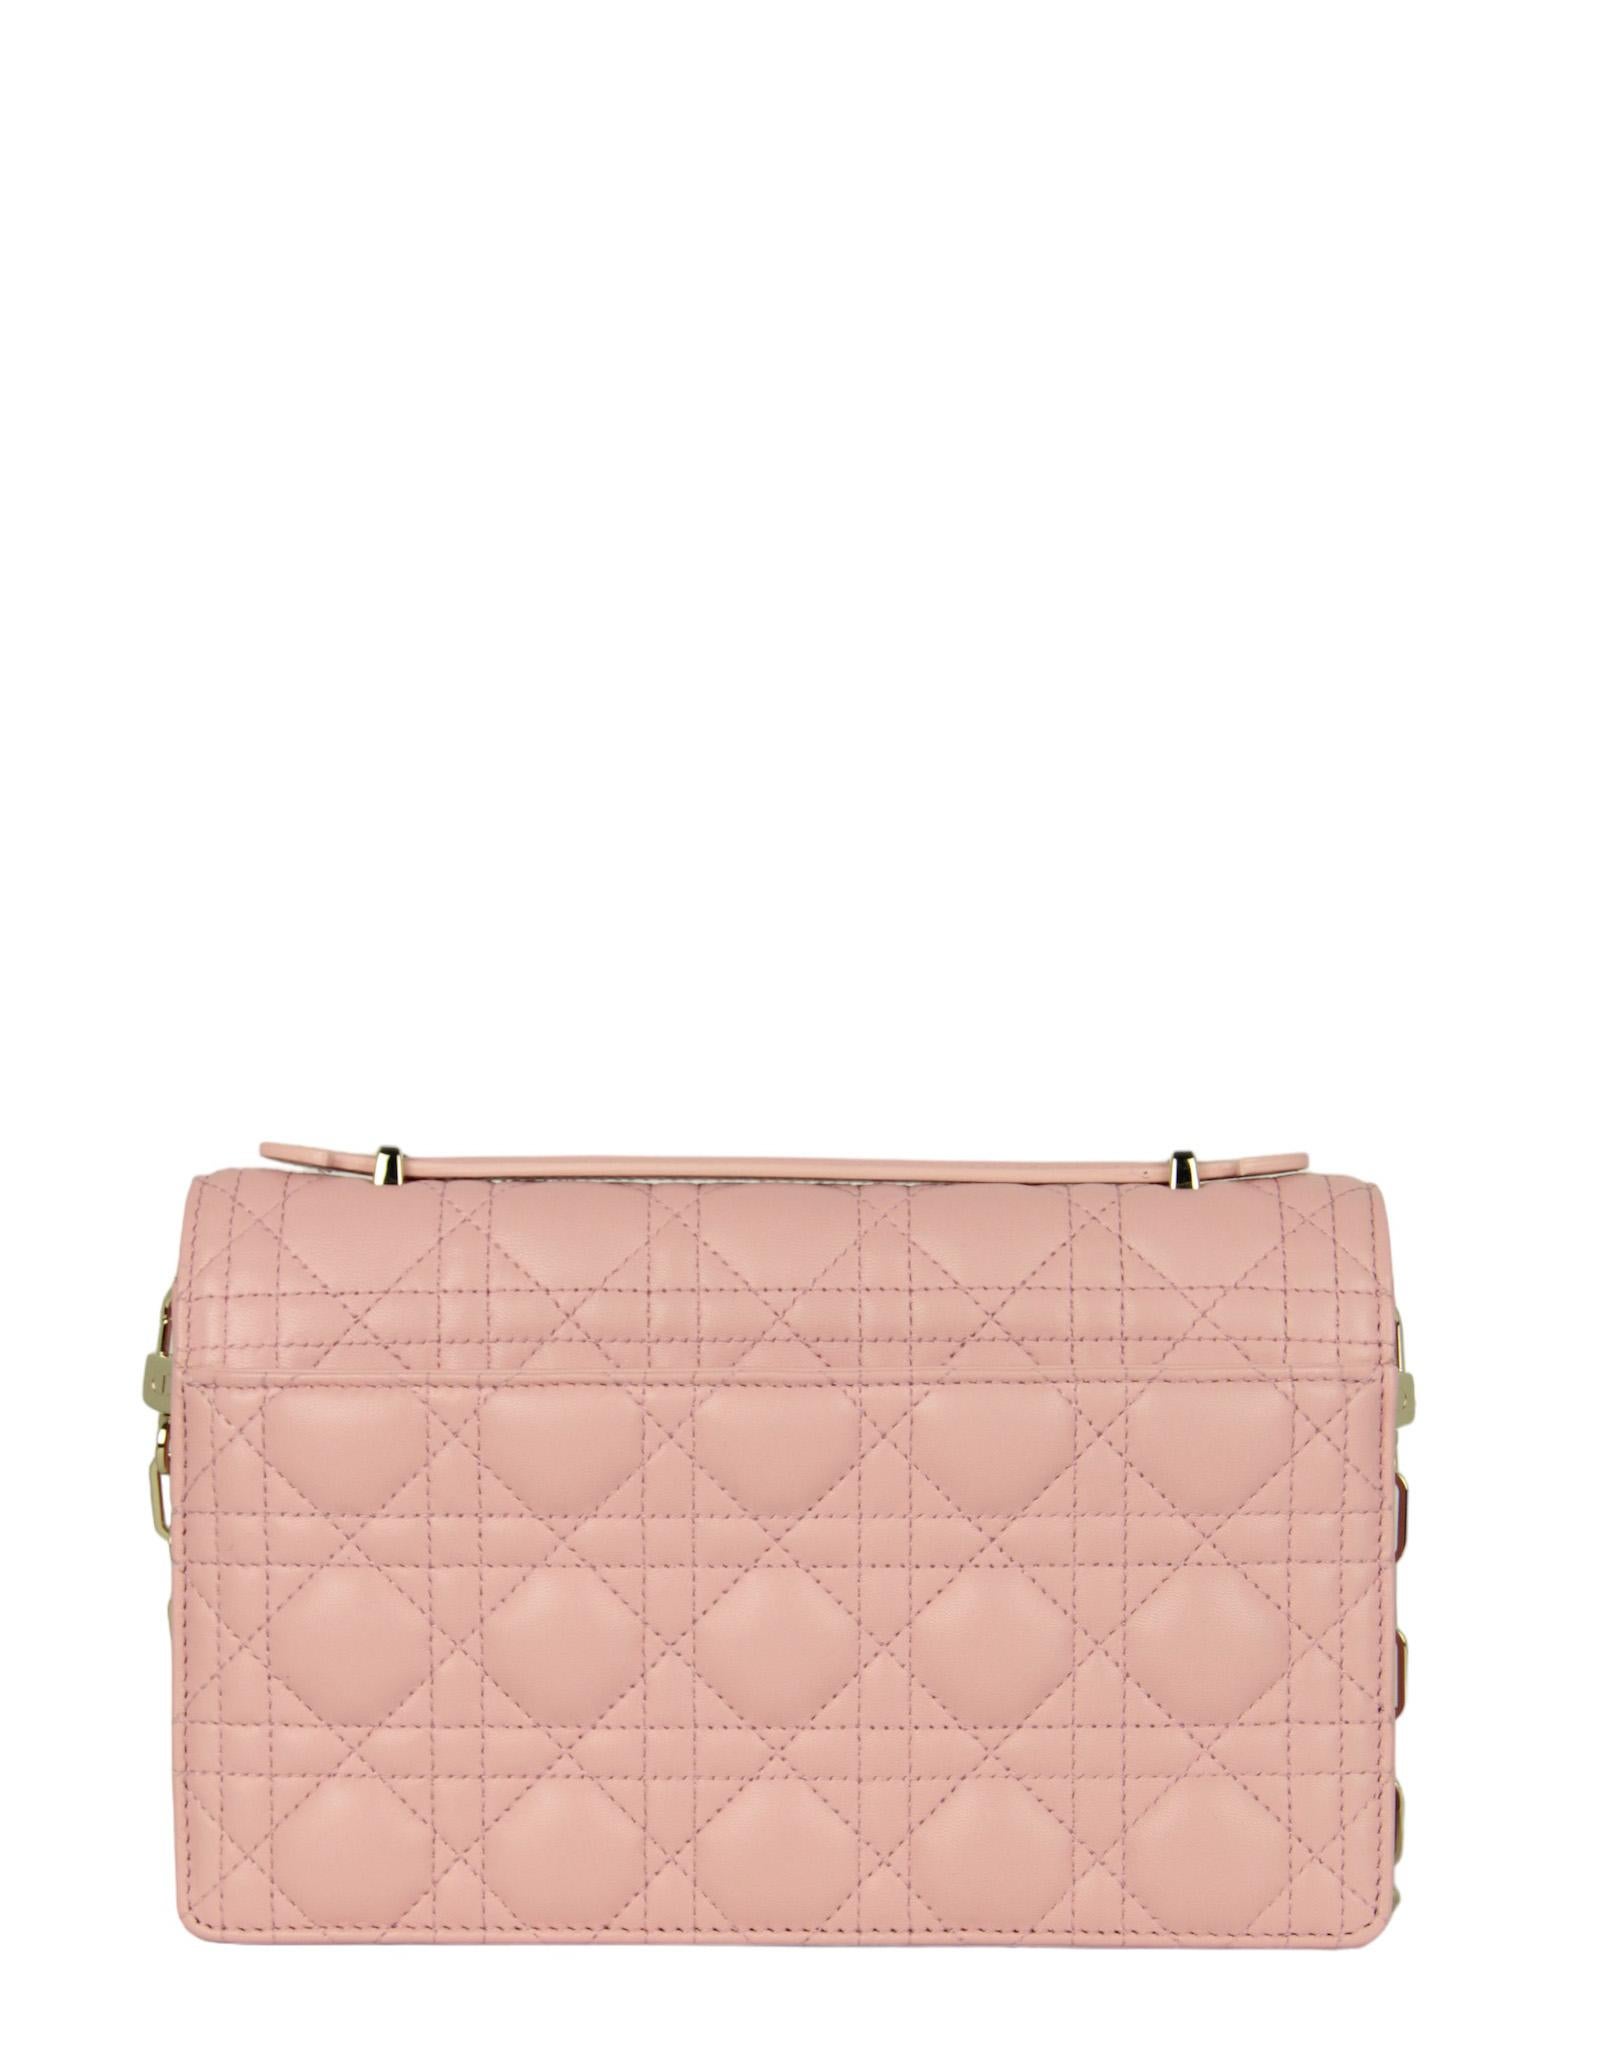 Christian Dior Melocoton Pink Cannage Quilted Miss Dior Top Handle Crossbody Bag In Excellent Condition For Sale In New York, NY